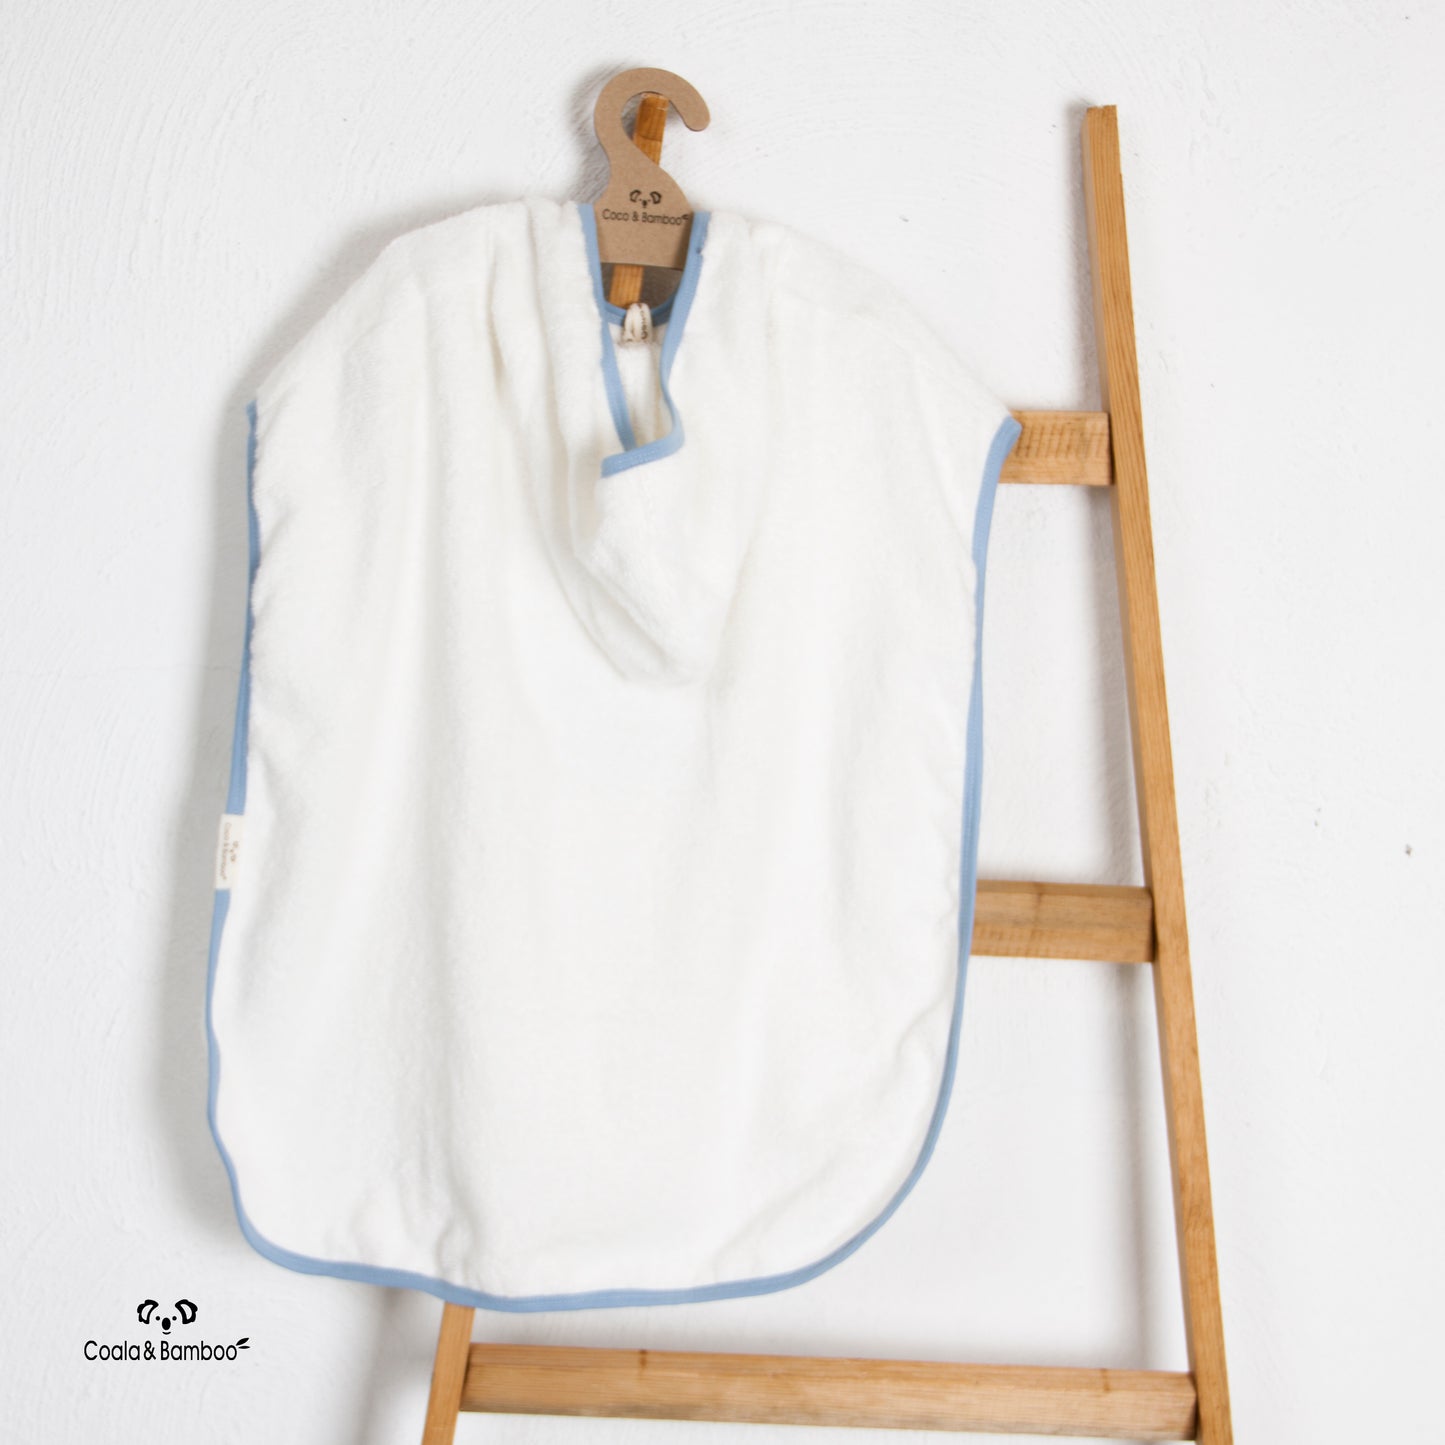 Bamboo Poncho -Aged 1 Yr to 7 Yrs- Colored Blue